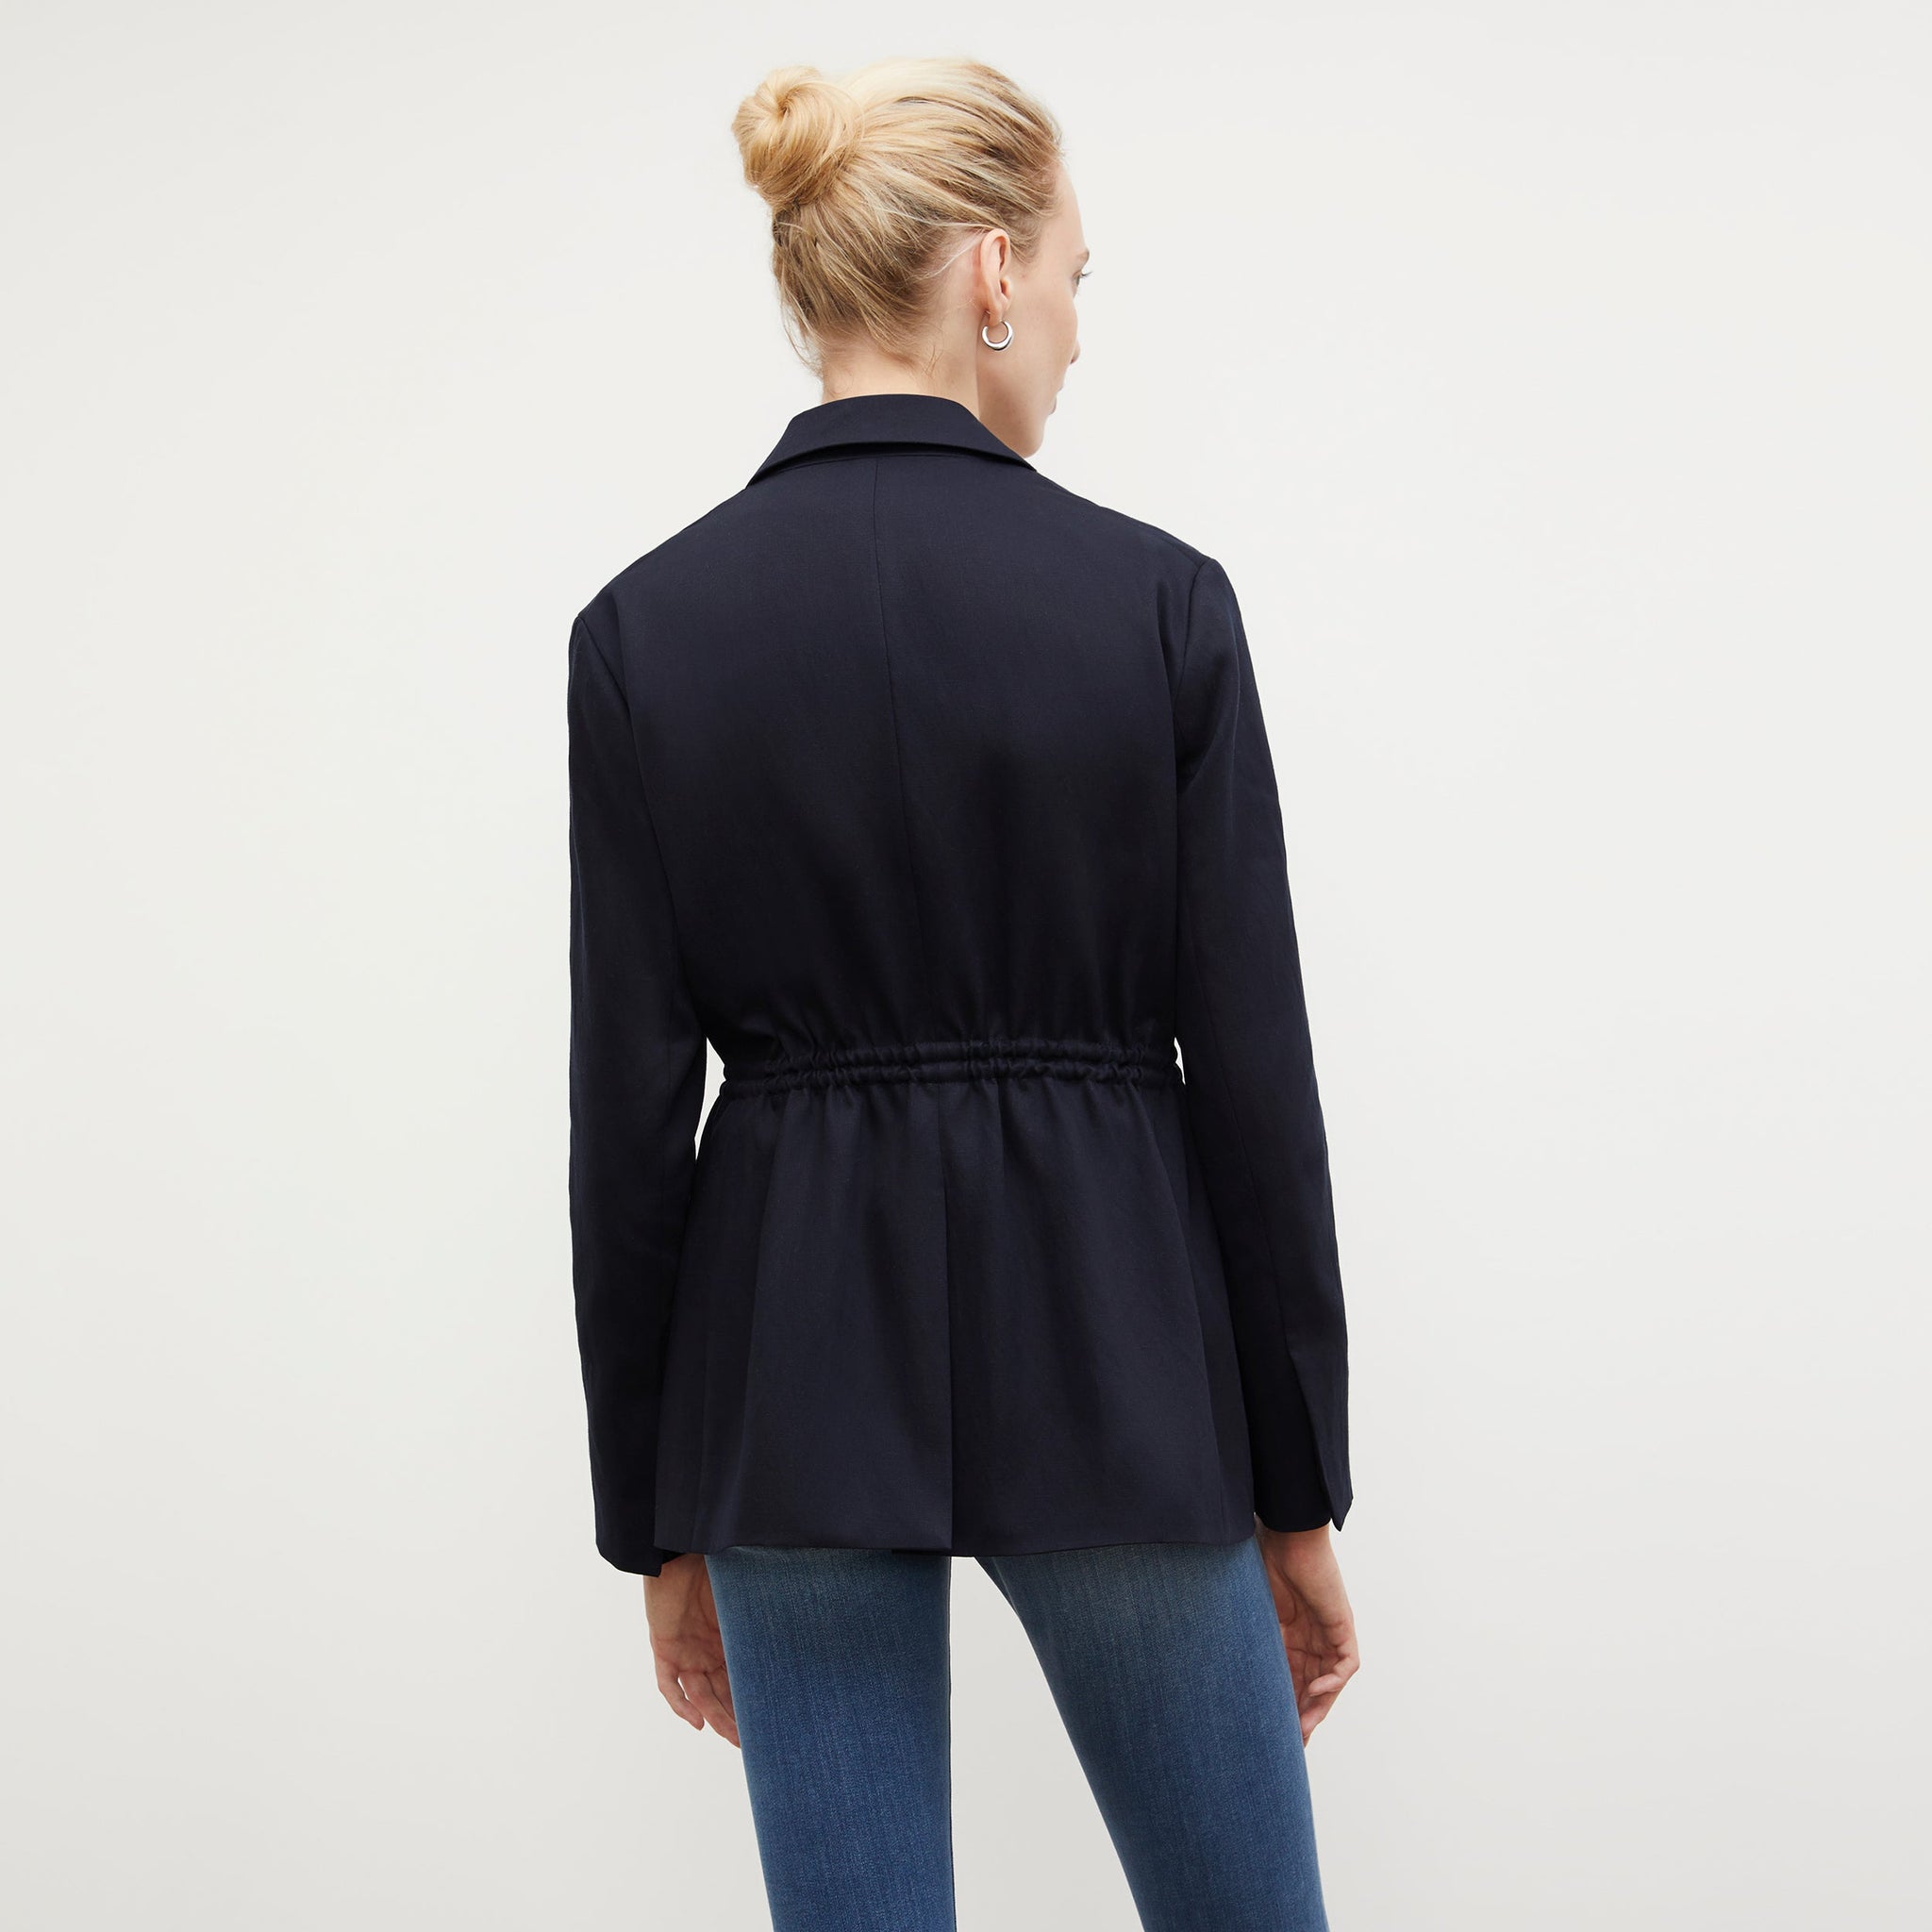 Back image of a woman wearing the Hyo Jacket - Everyday Twill in Night